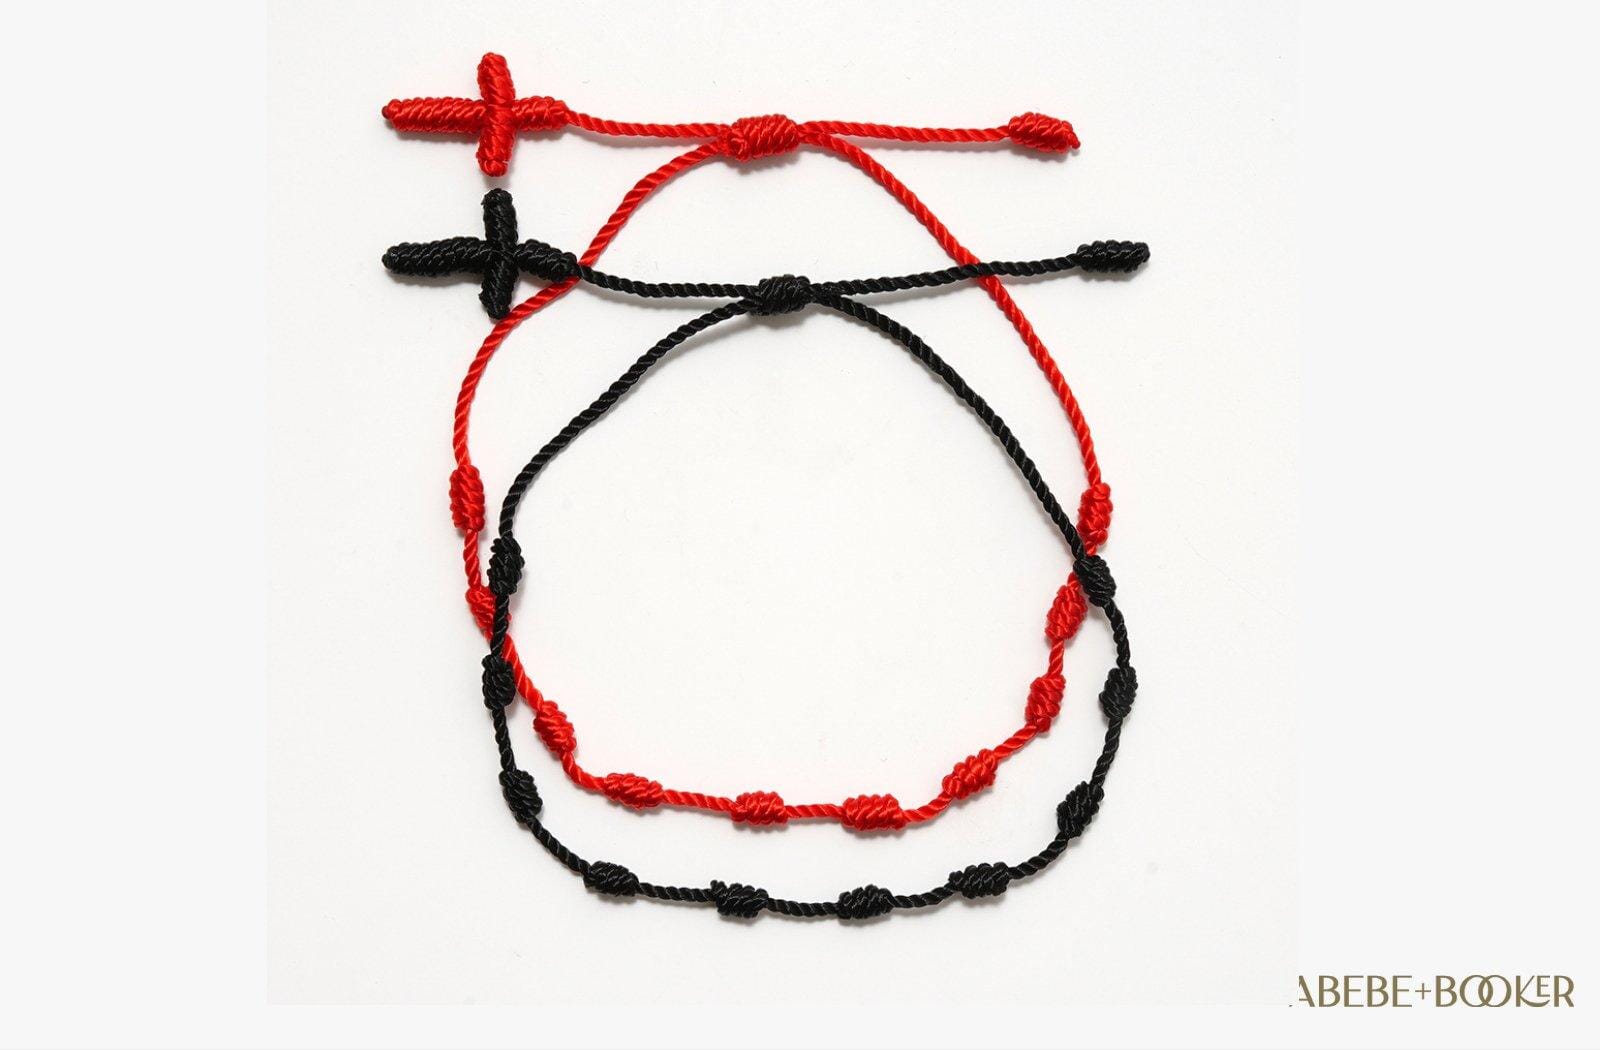 The red bracelet ≫ Amulet that counteracts the Evil Eye and envy